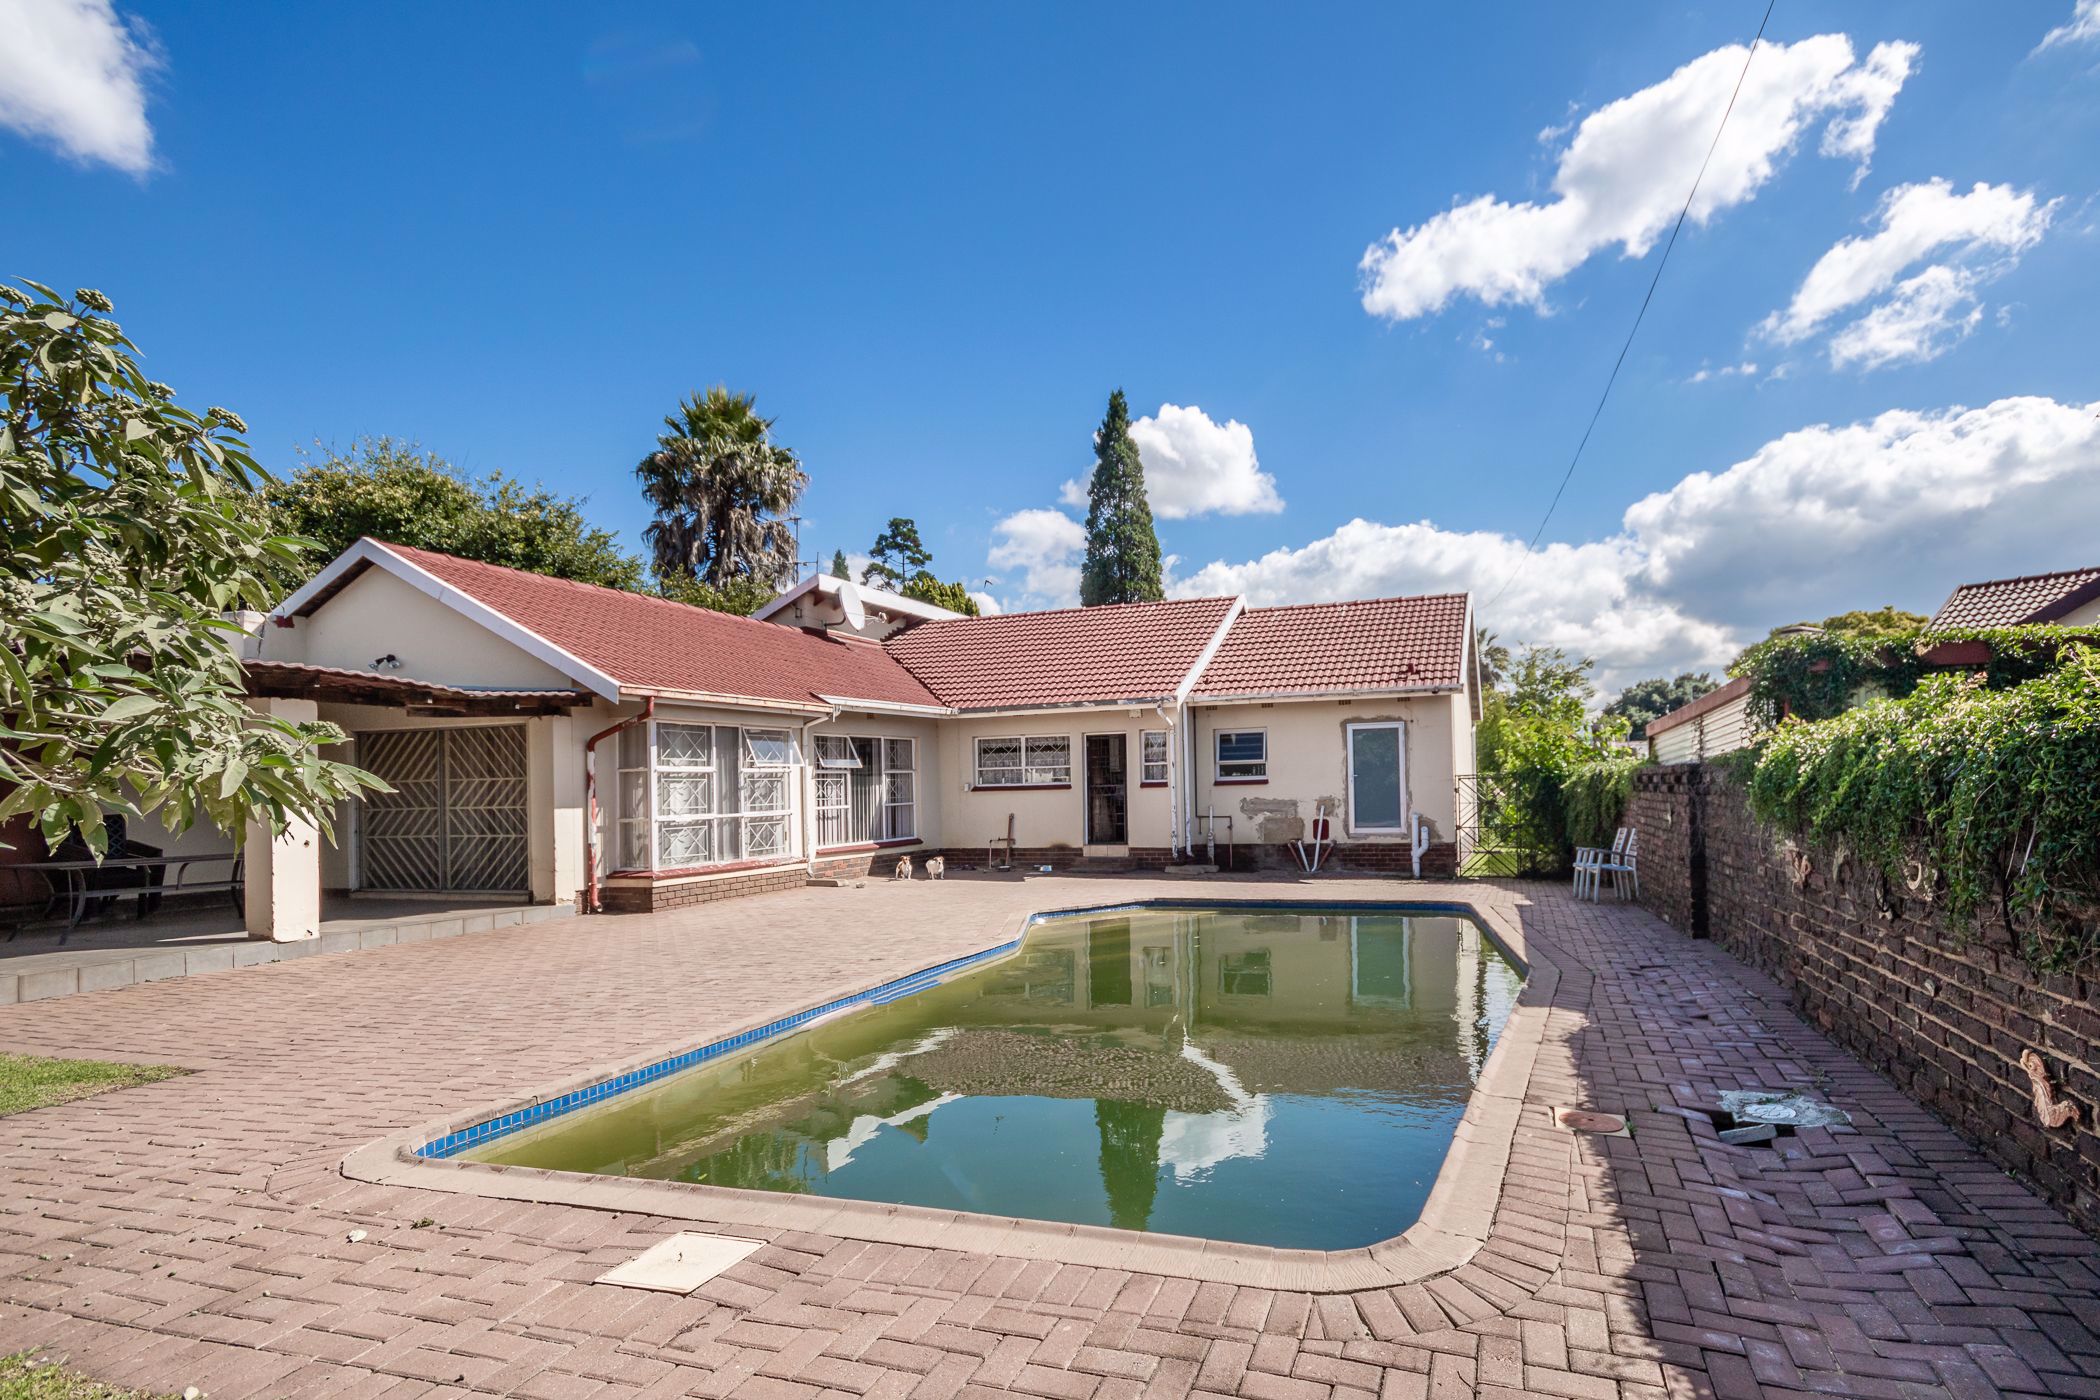 3 bedroom house for sale in Witfield